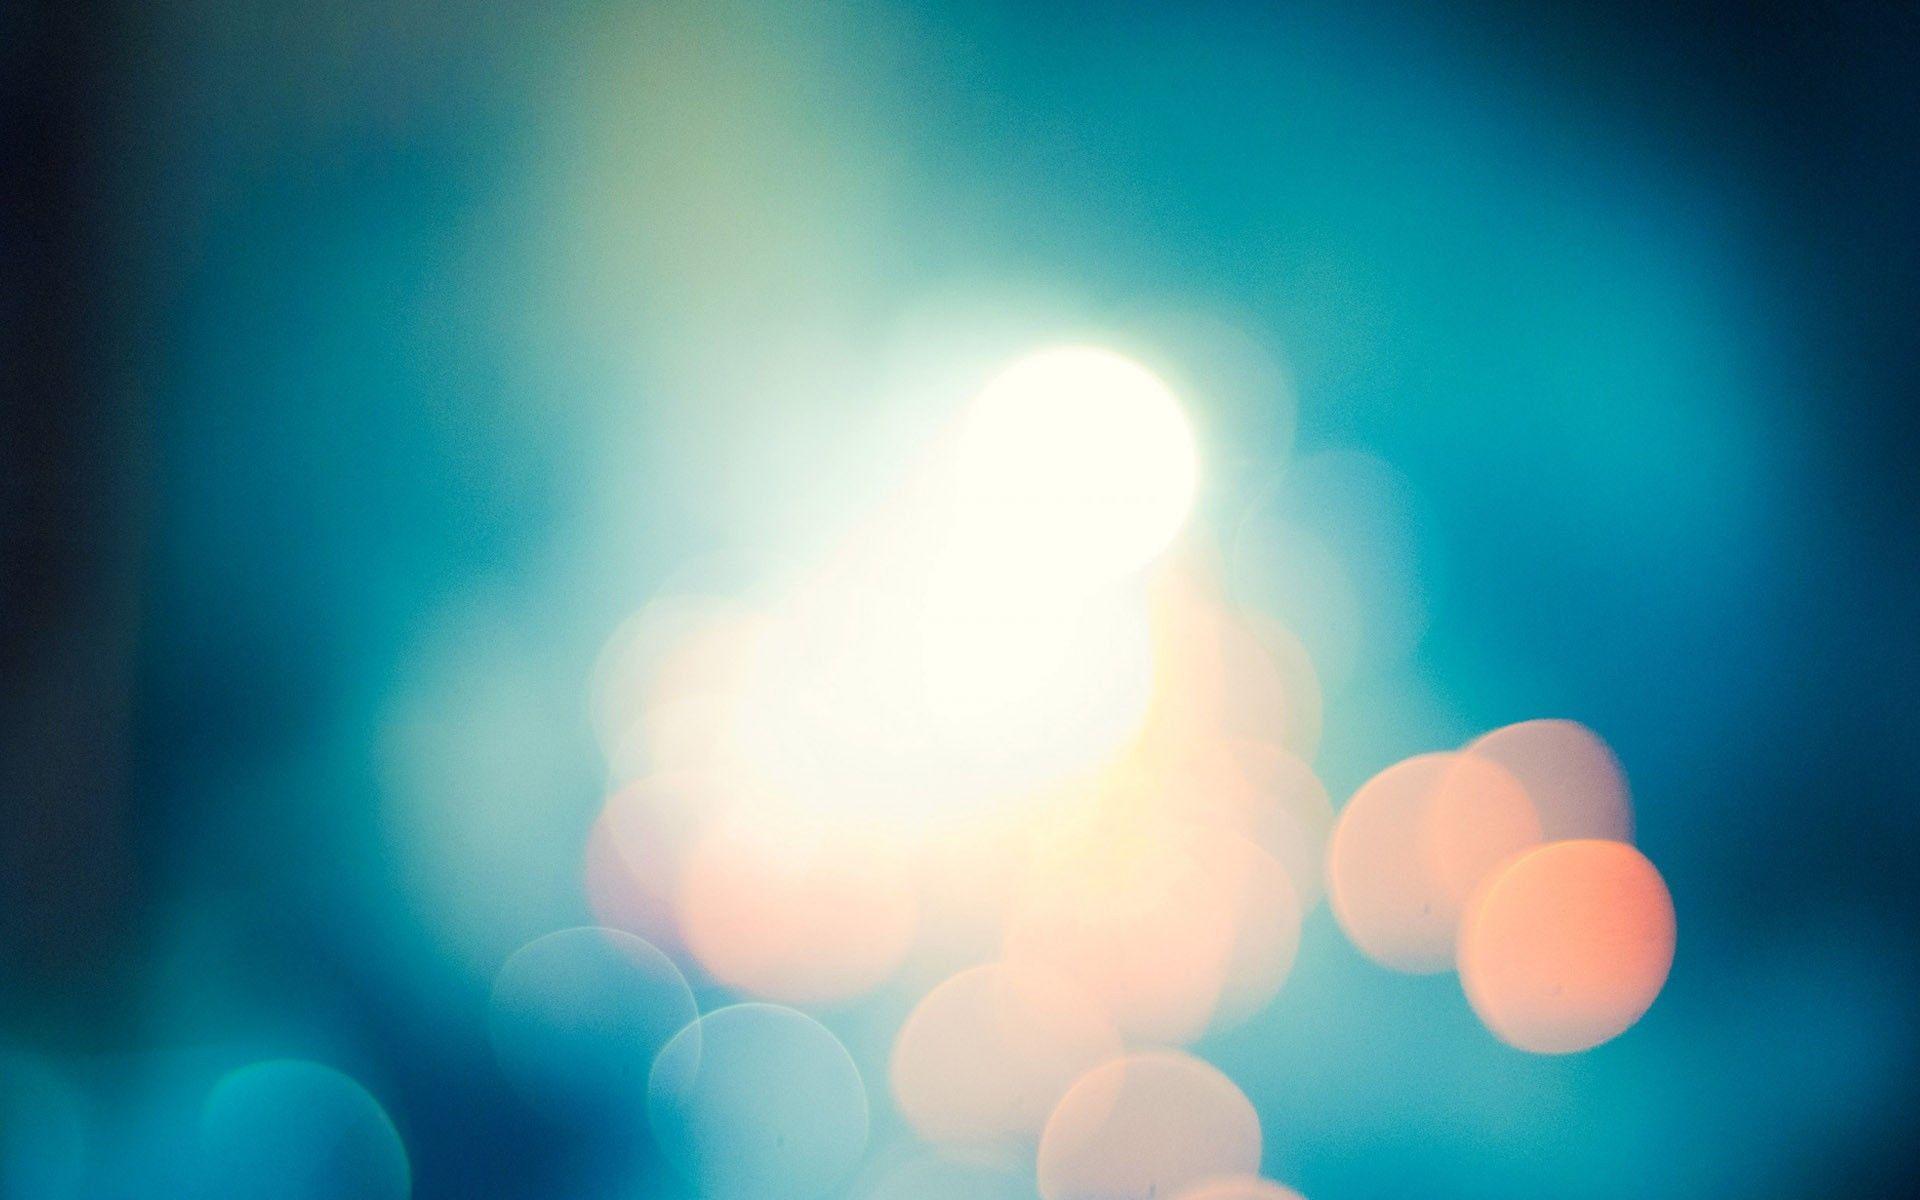 Blurry Wallpaper HD Free Download. Blurry lights, Blurry picture, Wallpaper